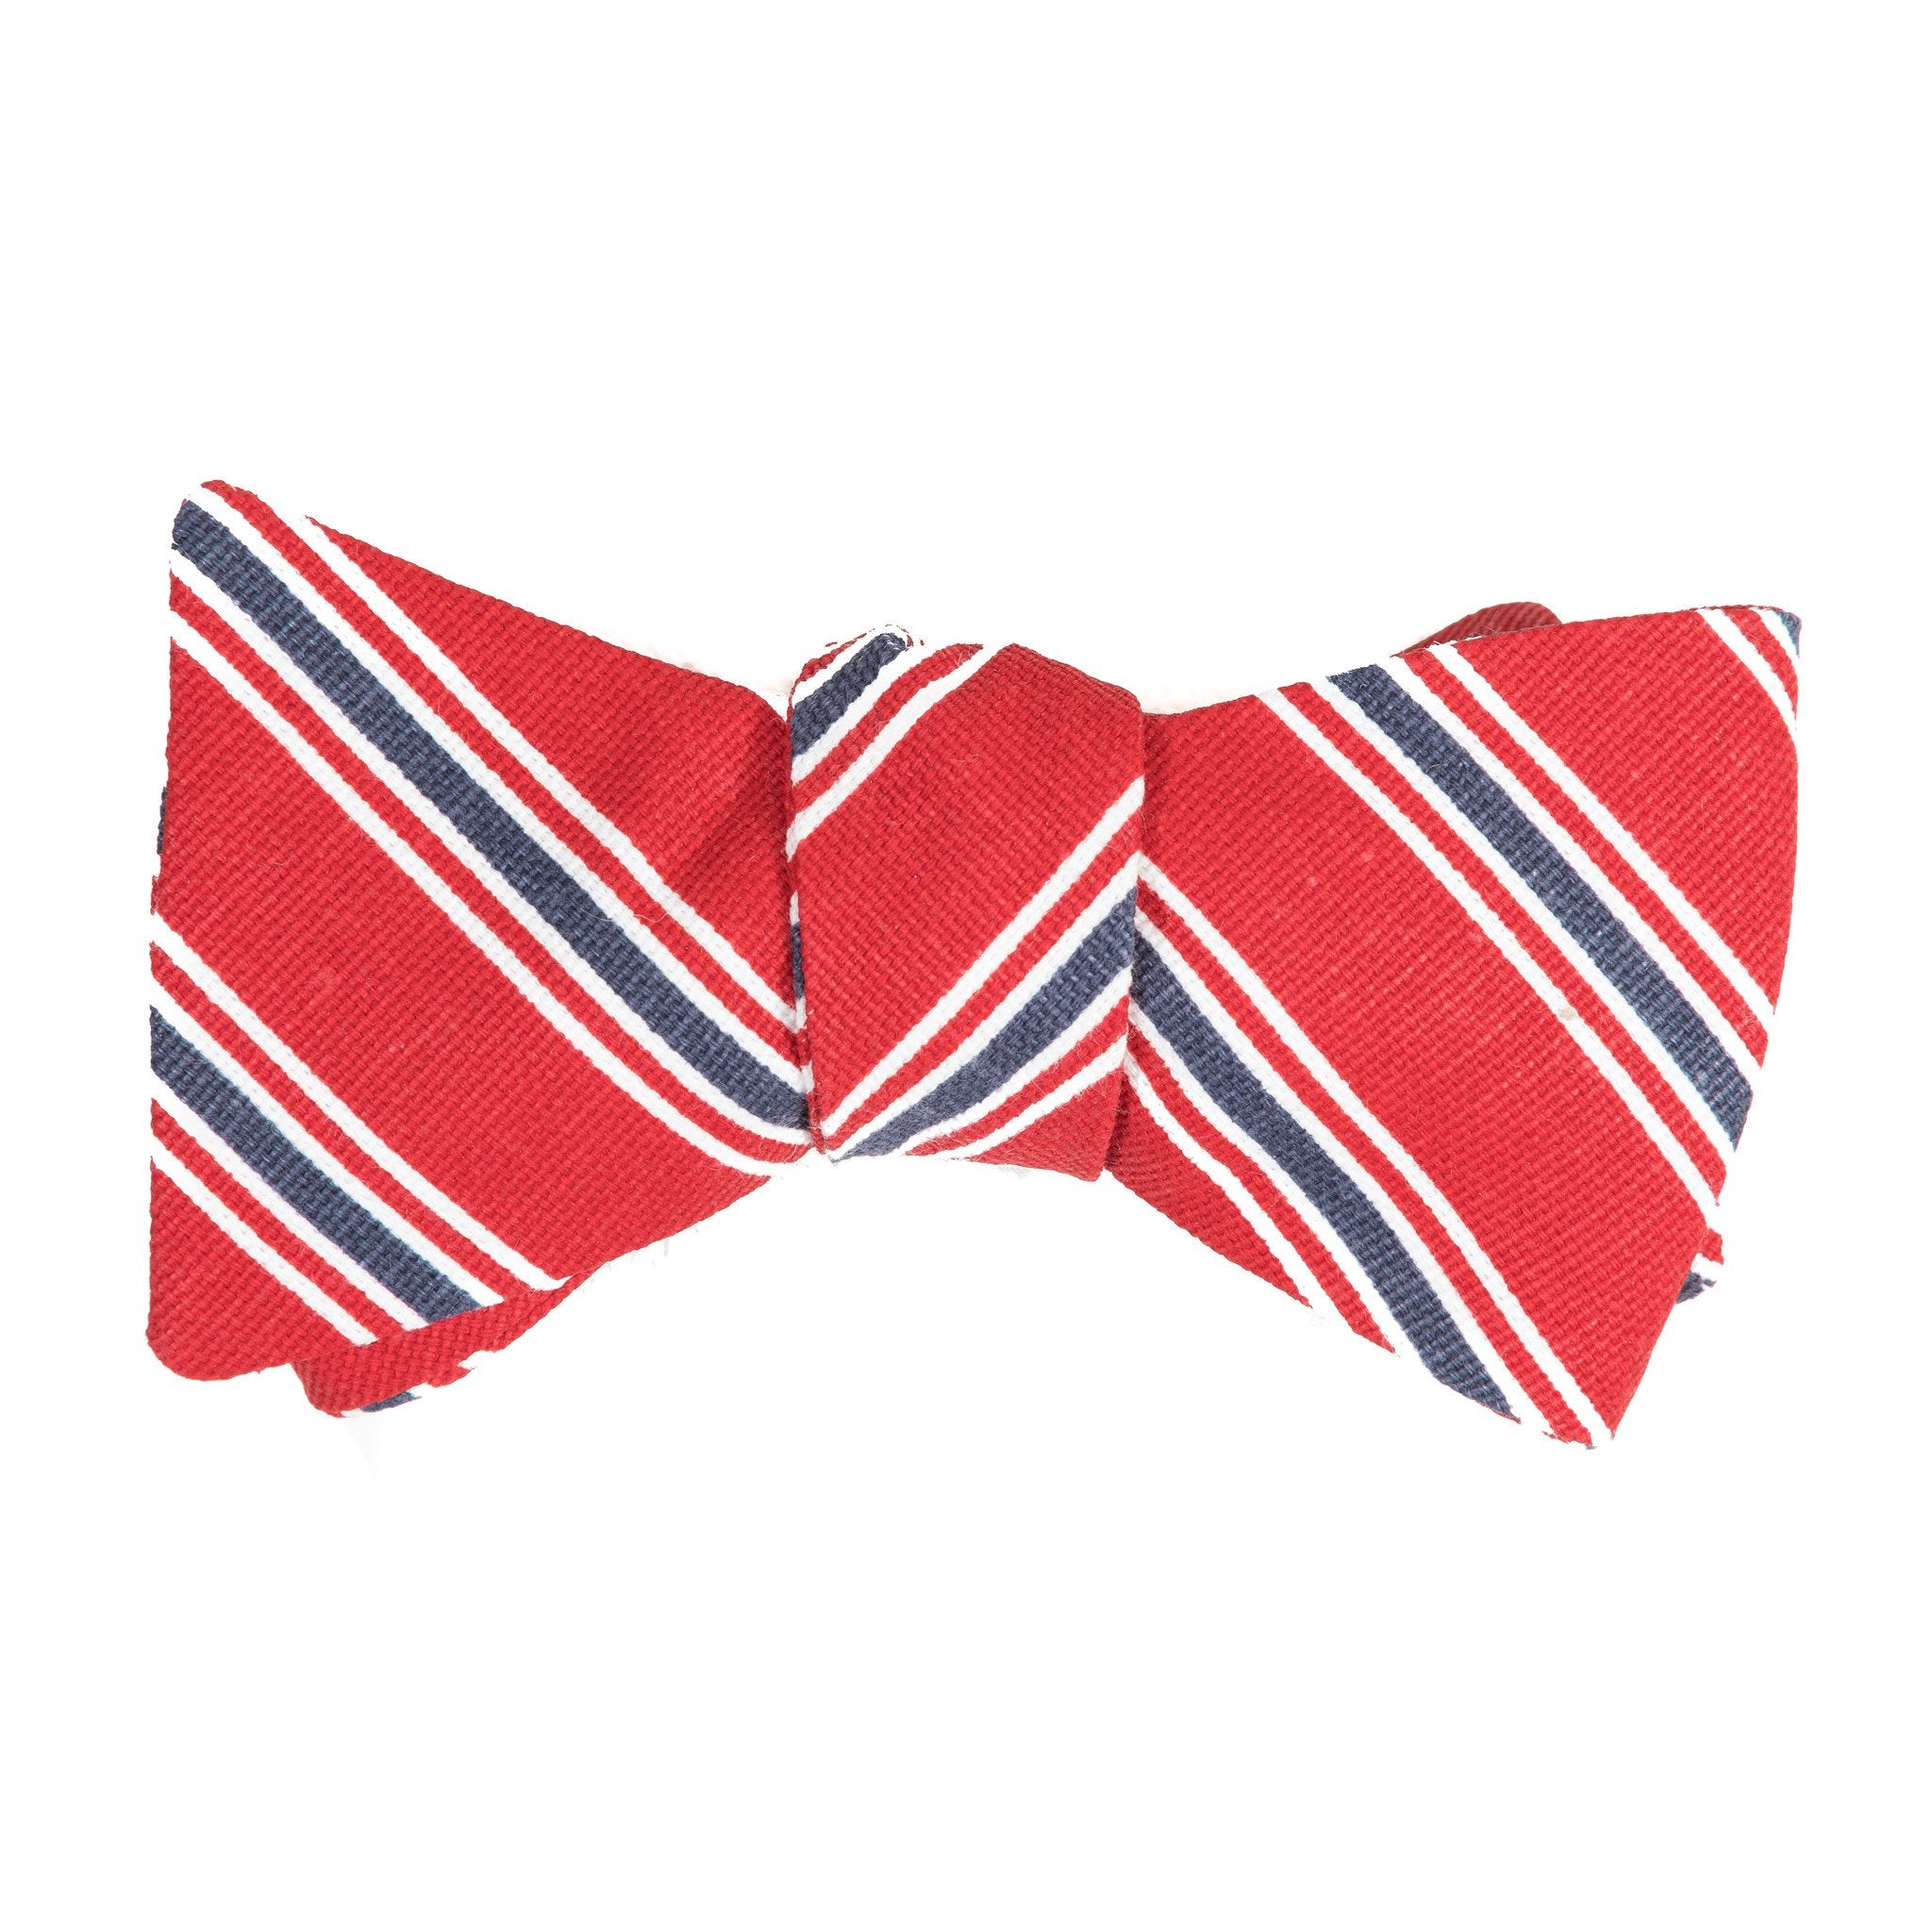 Mill City Fineries The Cambridge Bow Tie